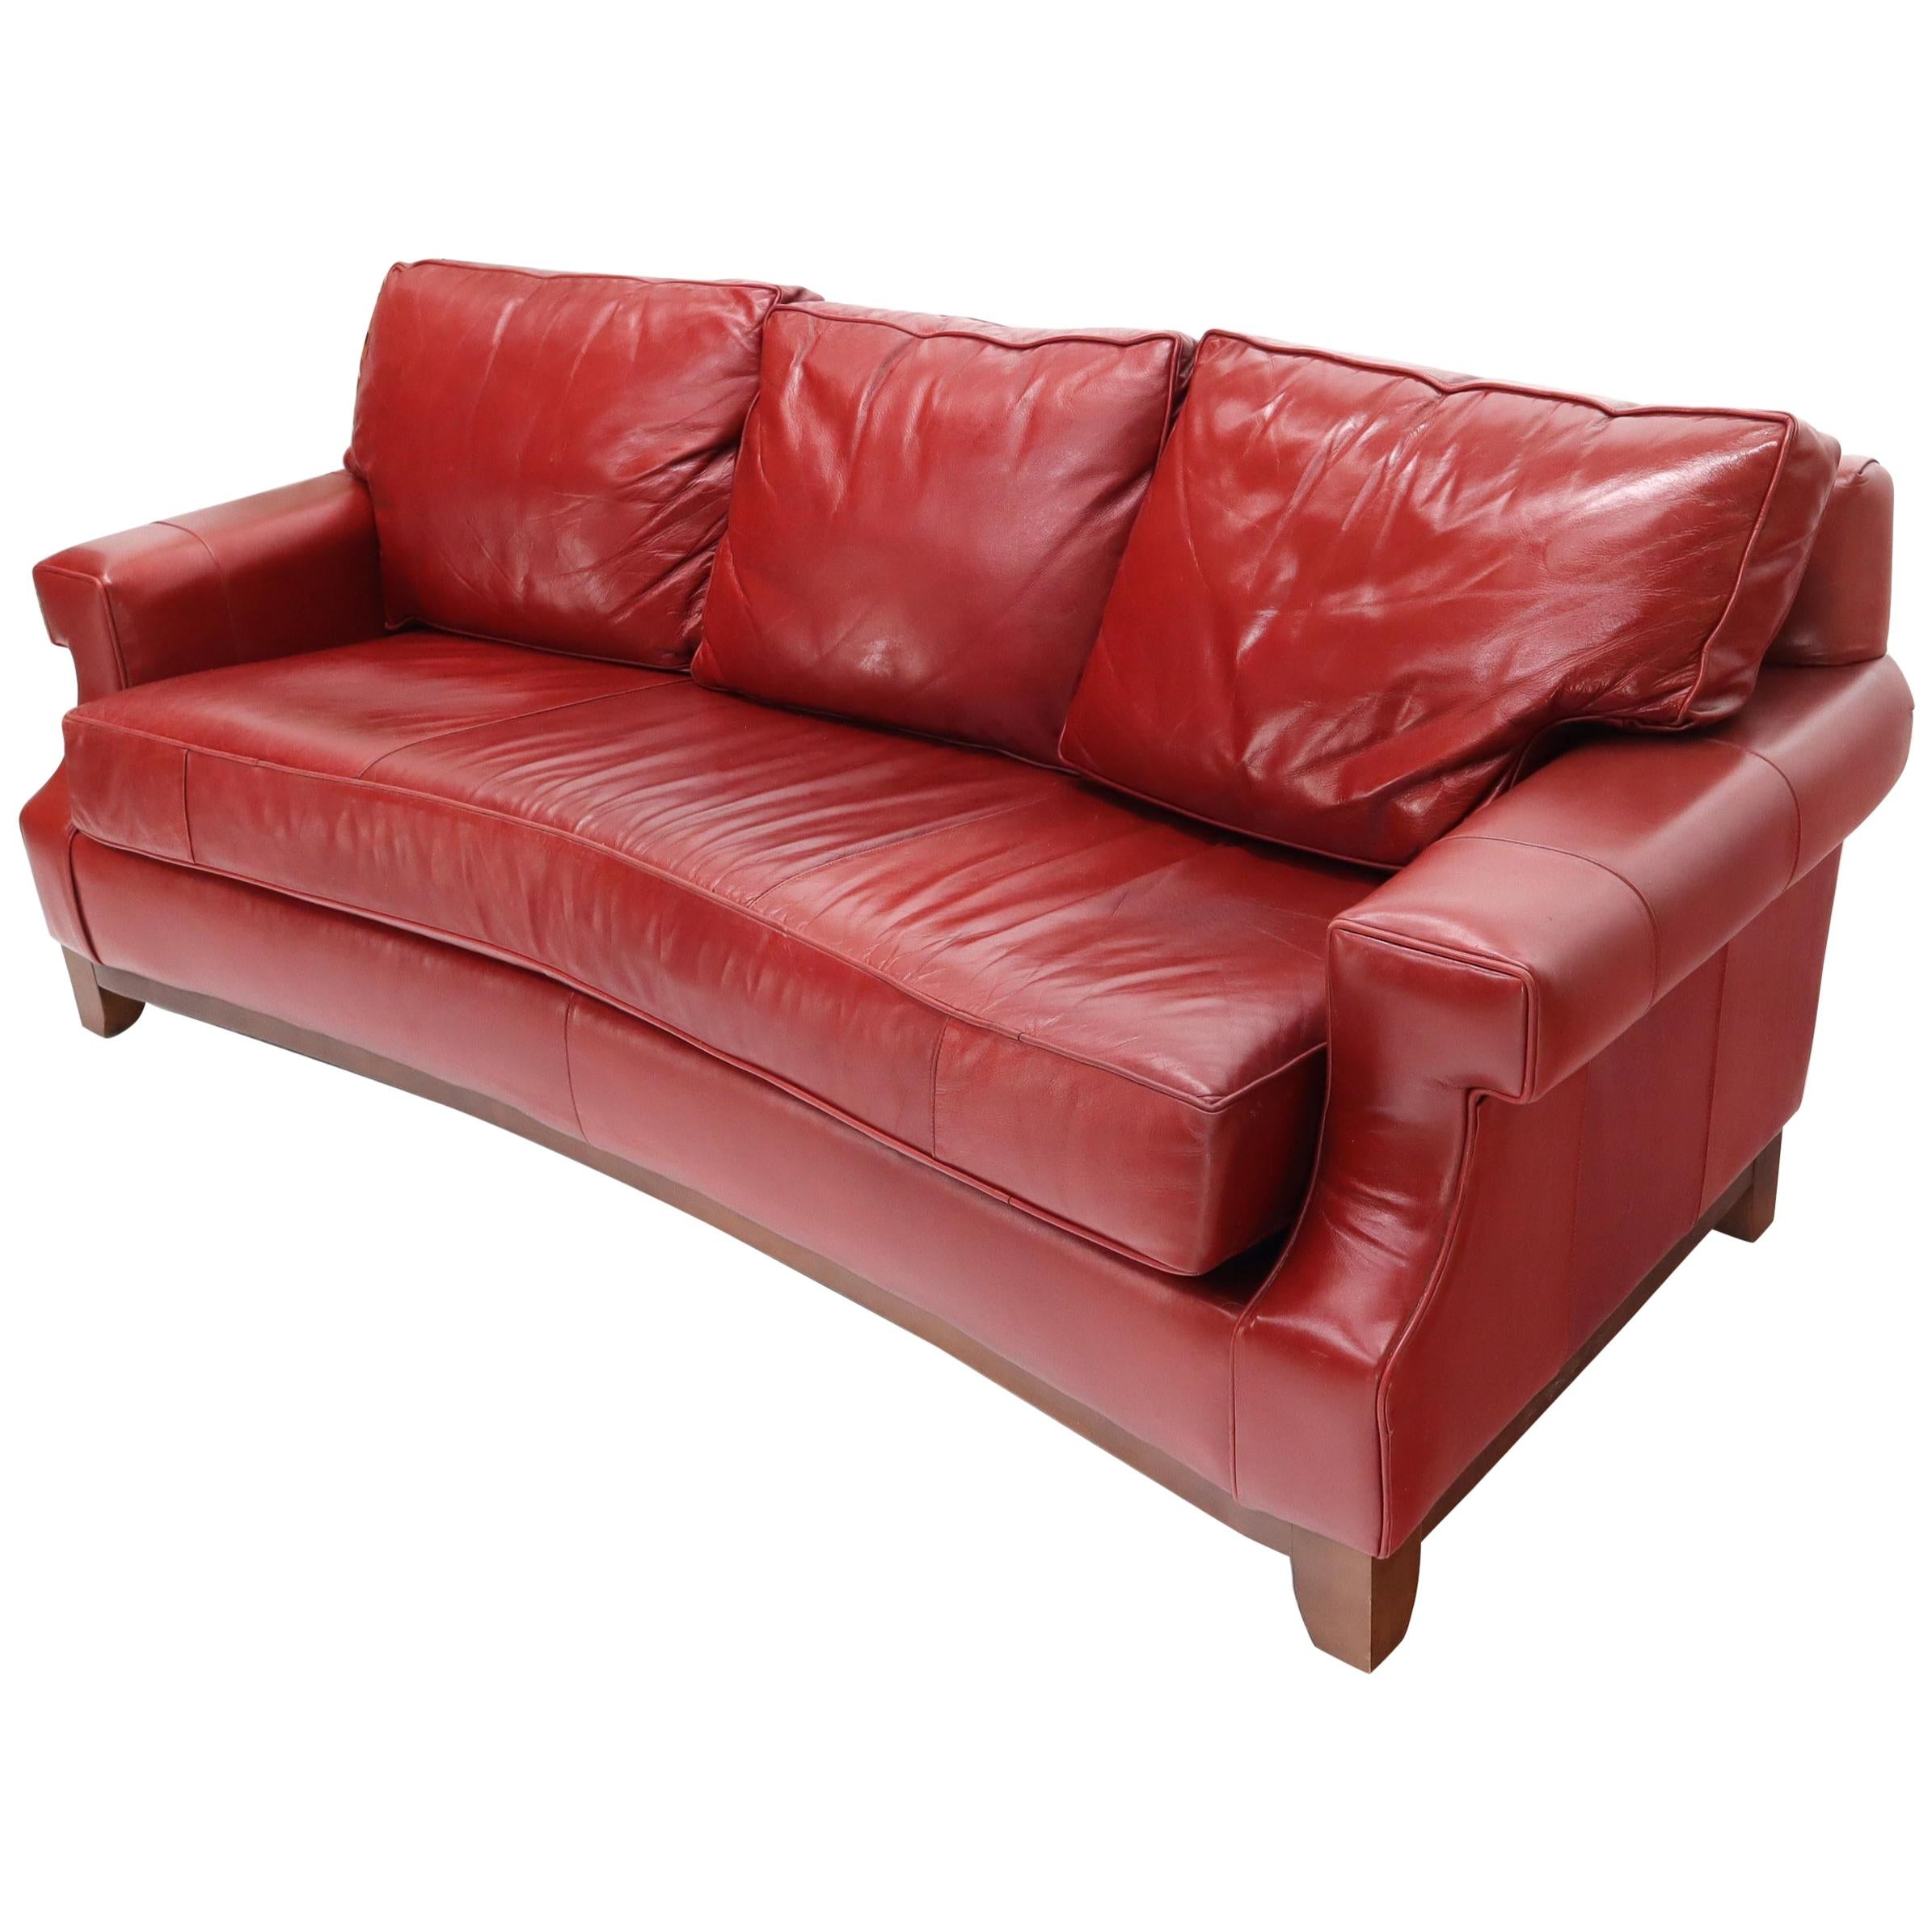 Concave Front Edge Tomato Red Leather, Thomasville Leather Couch